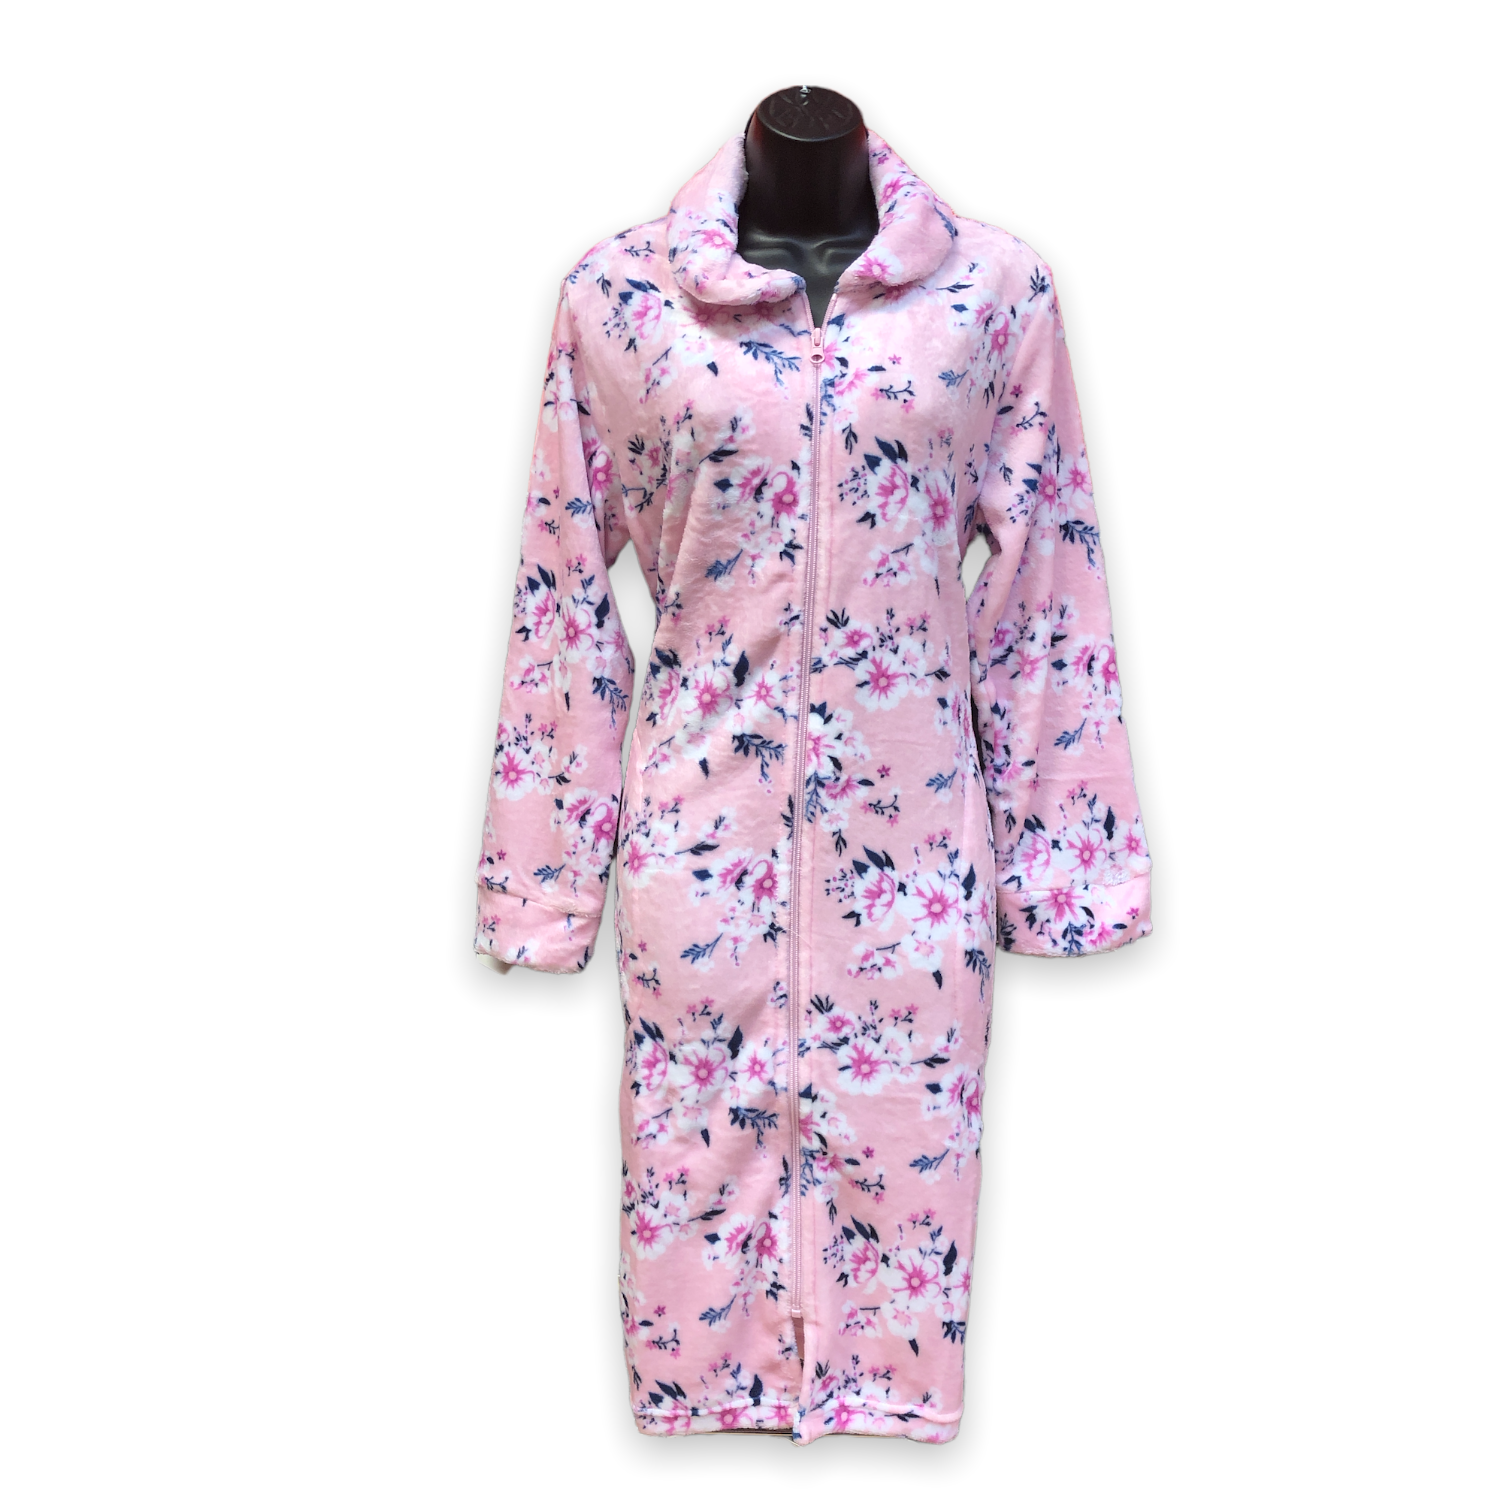 Women's Plush Micropolar Printed Robes with Zip Front